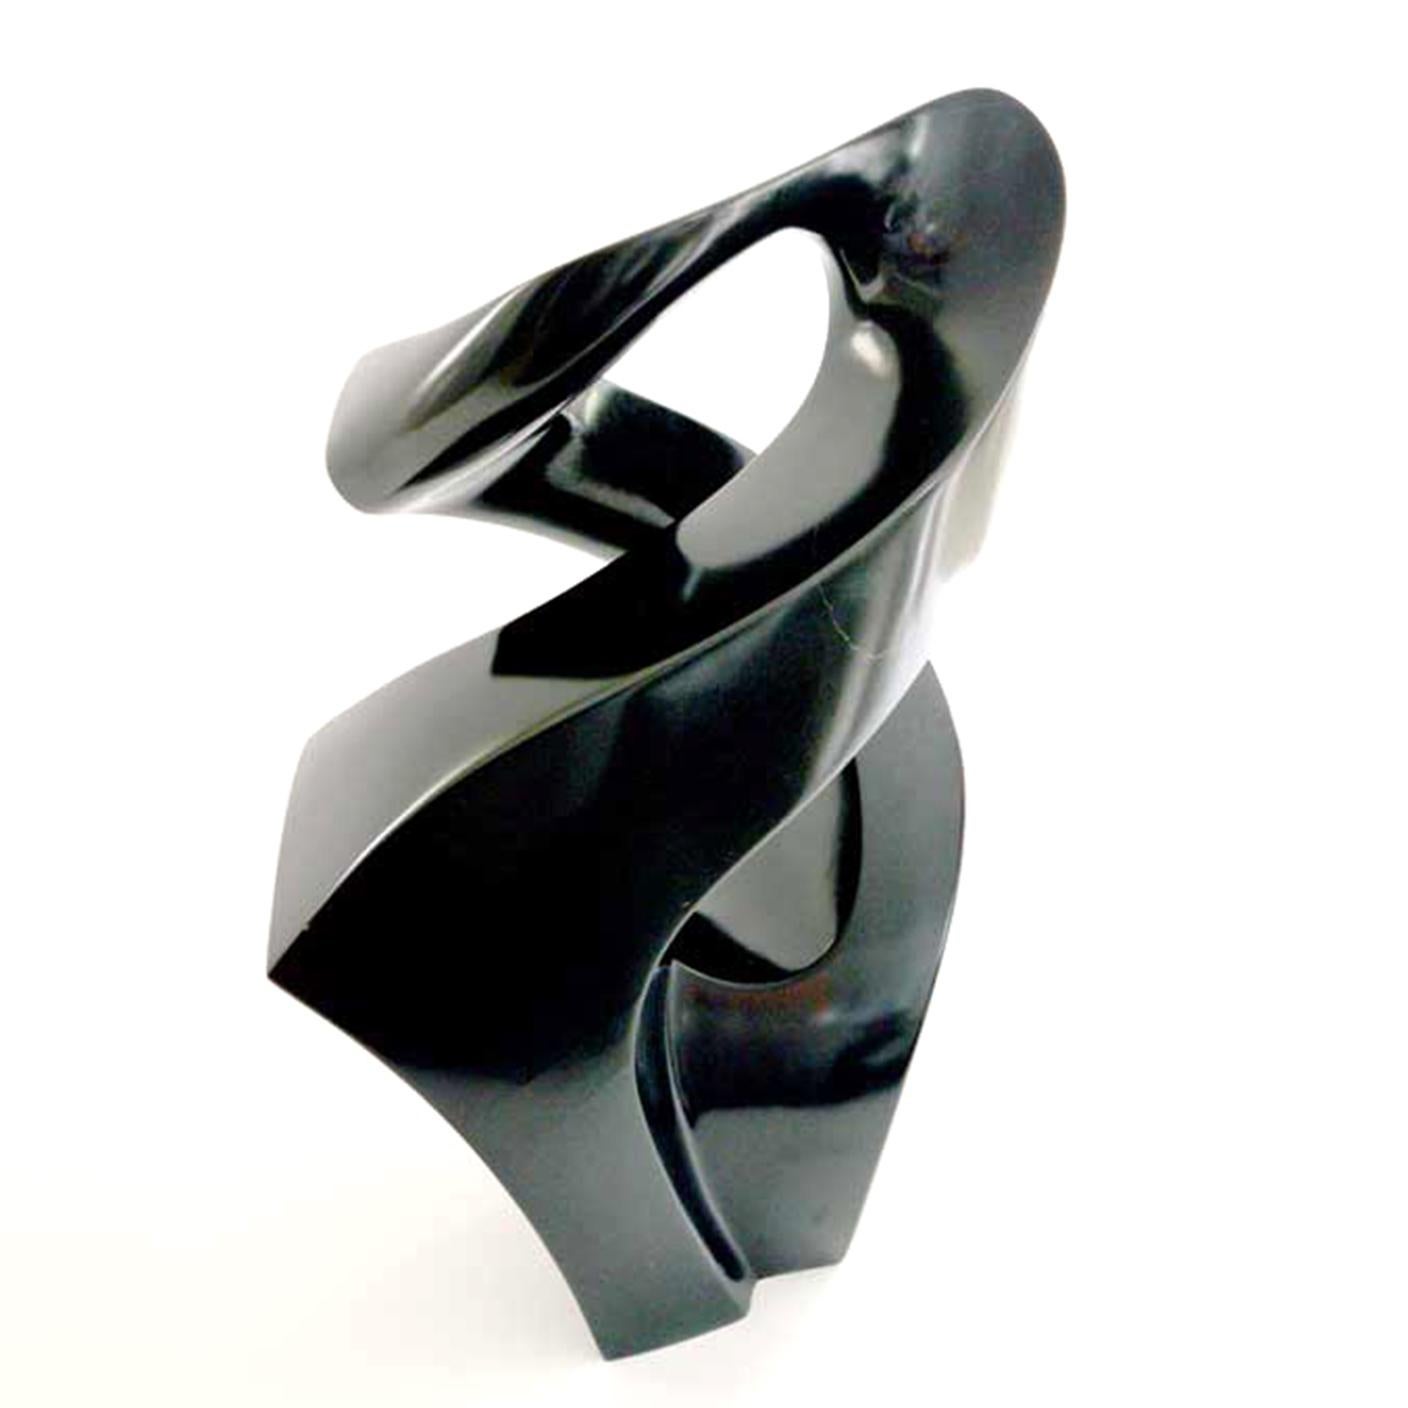 Embrace - small, smooth, polished, abstract, black marble sculpture - Black Abstract Sculpture by Jeremy Guy